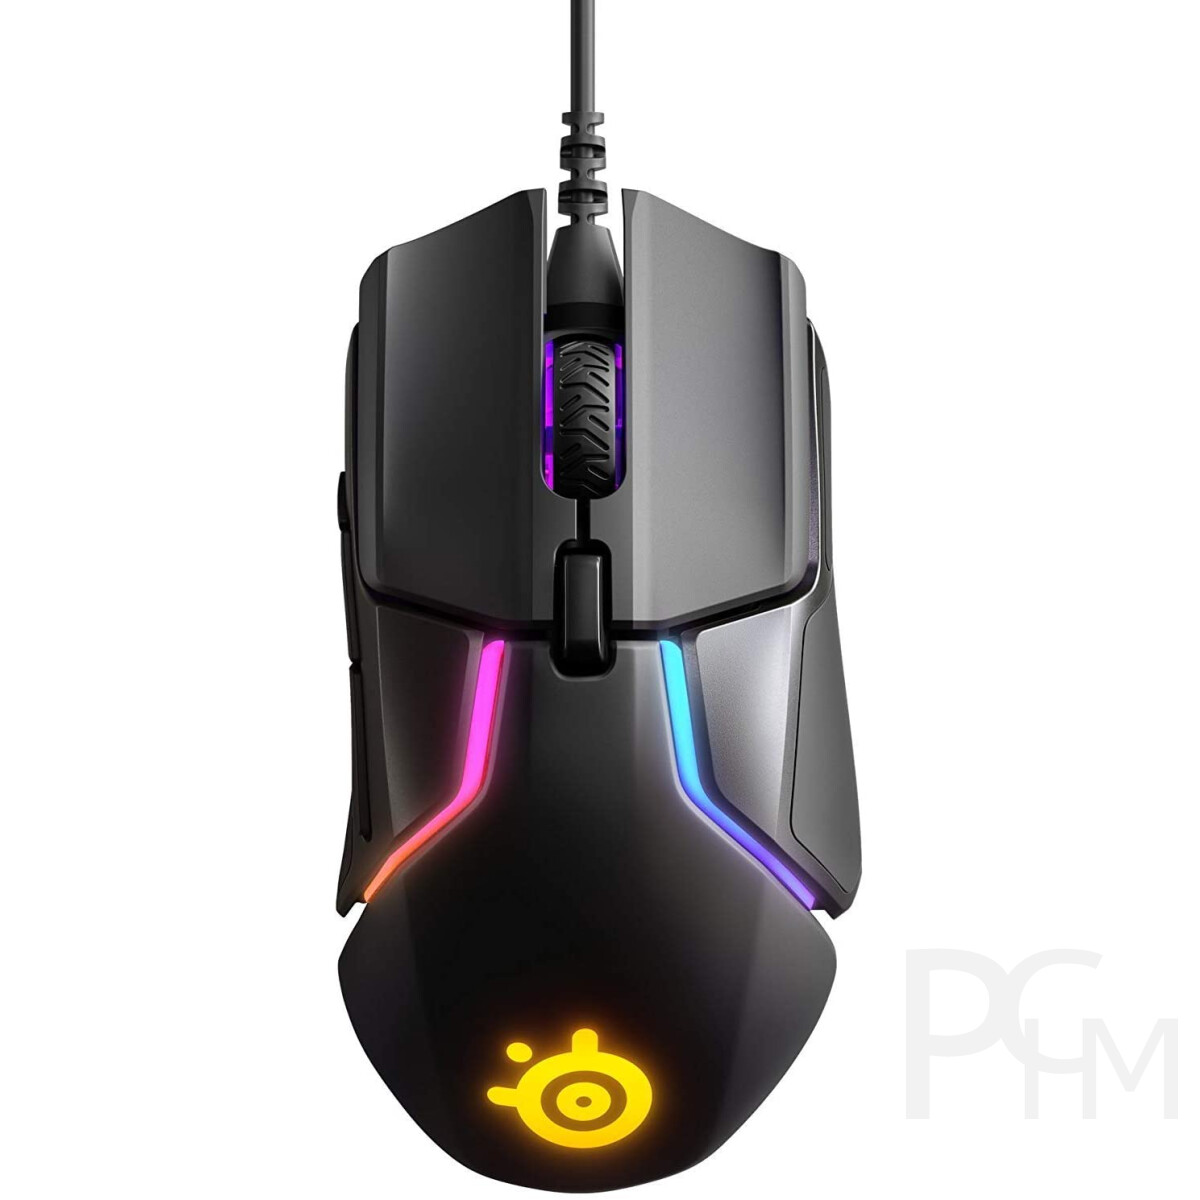 € Gaming Maus Rival 600 79,99 SteelSeries - 12.000 PCHM, DPI -